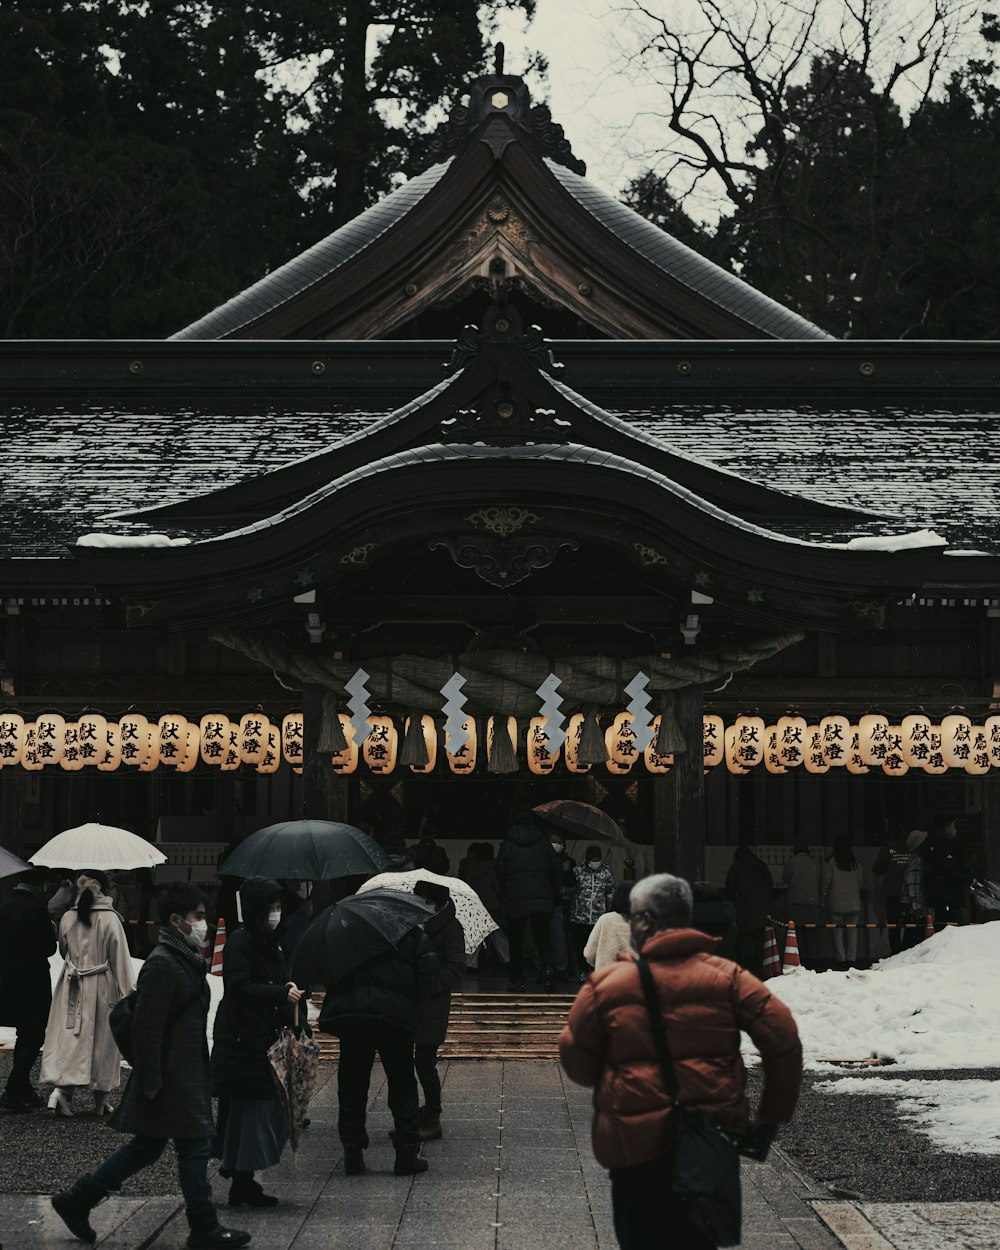 a group of people with umbrellas standing in front of a building